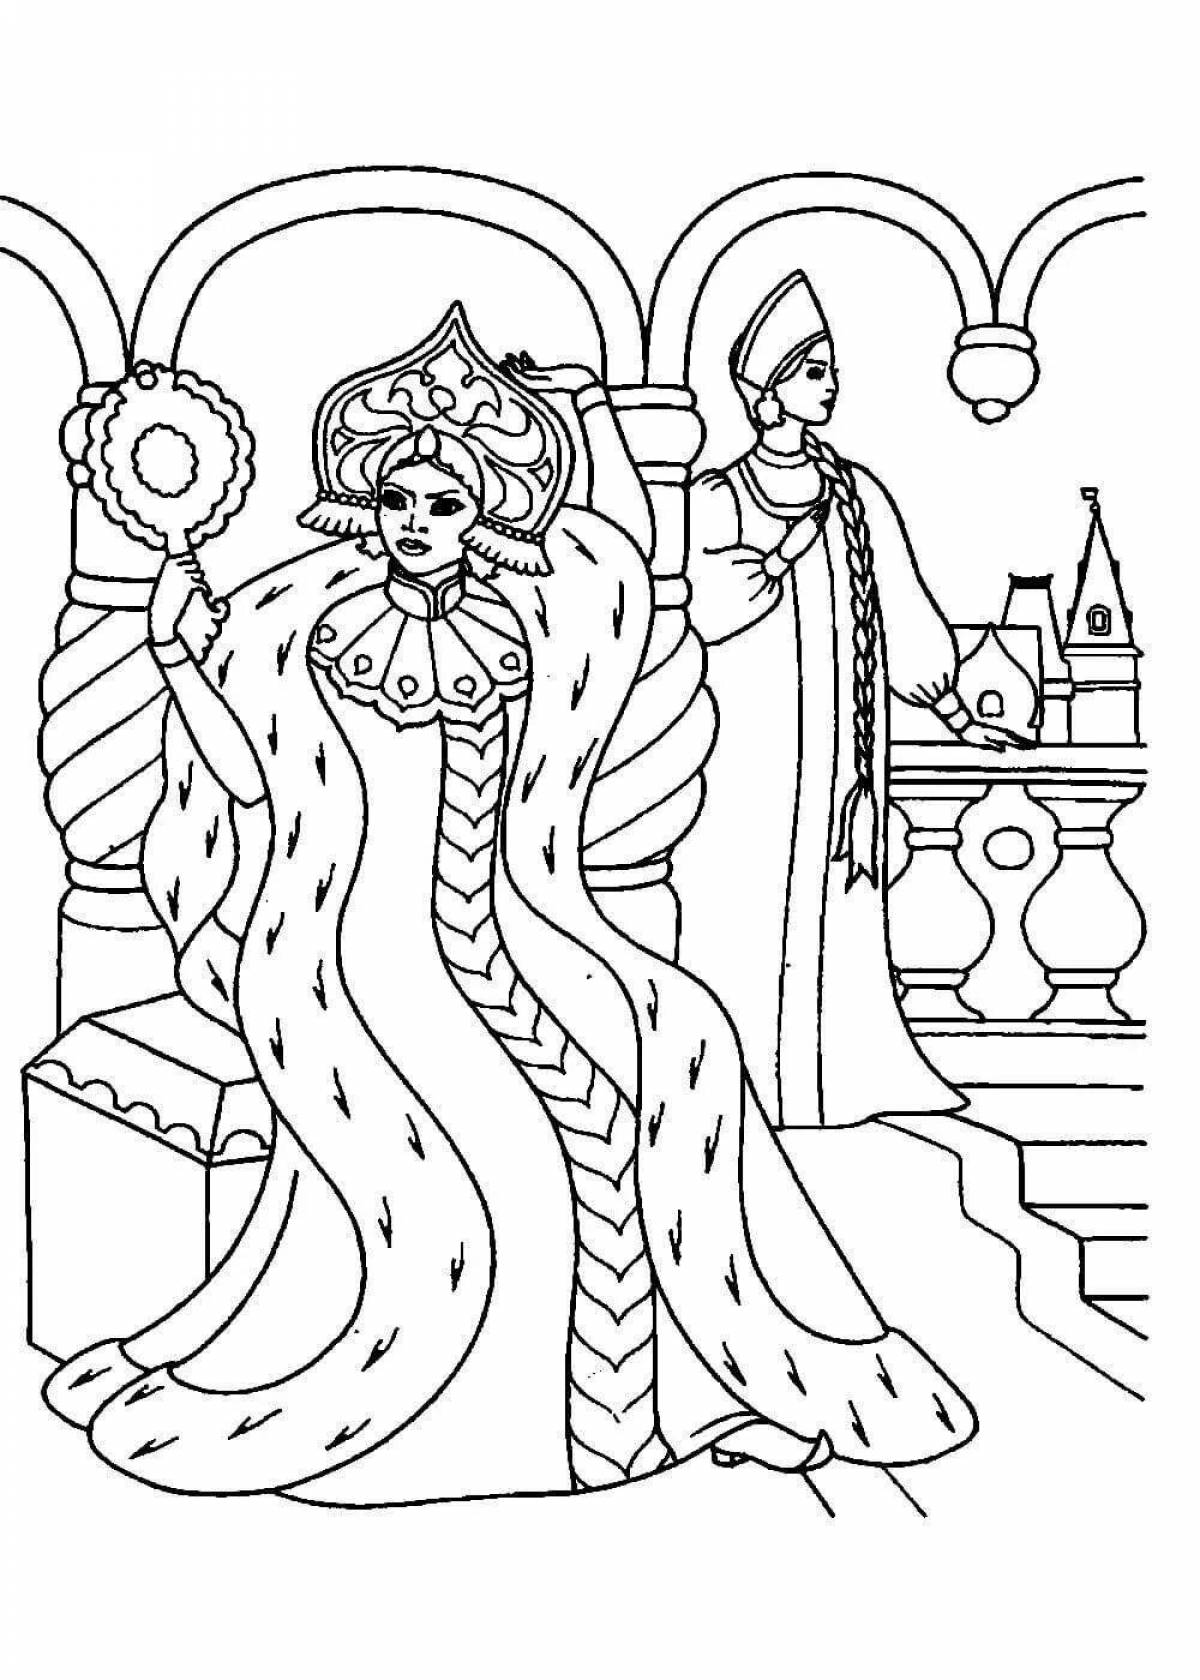 Coloring book based on Pushkin's fairy tales for children 5-6 years old